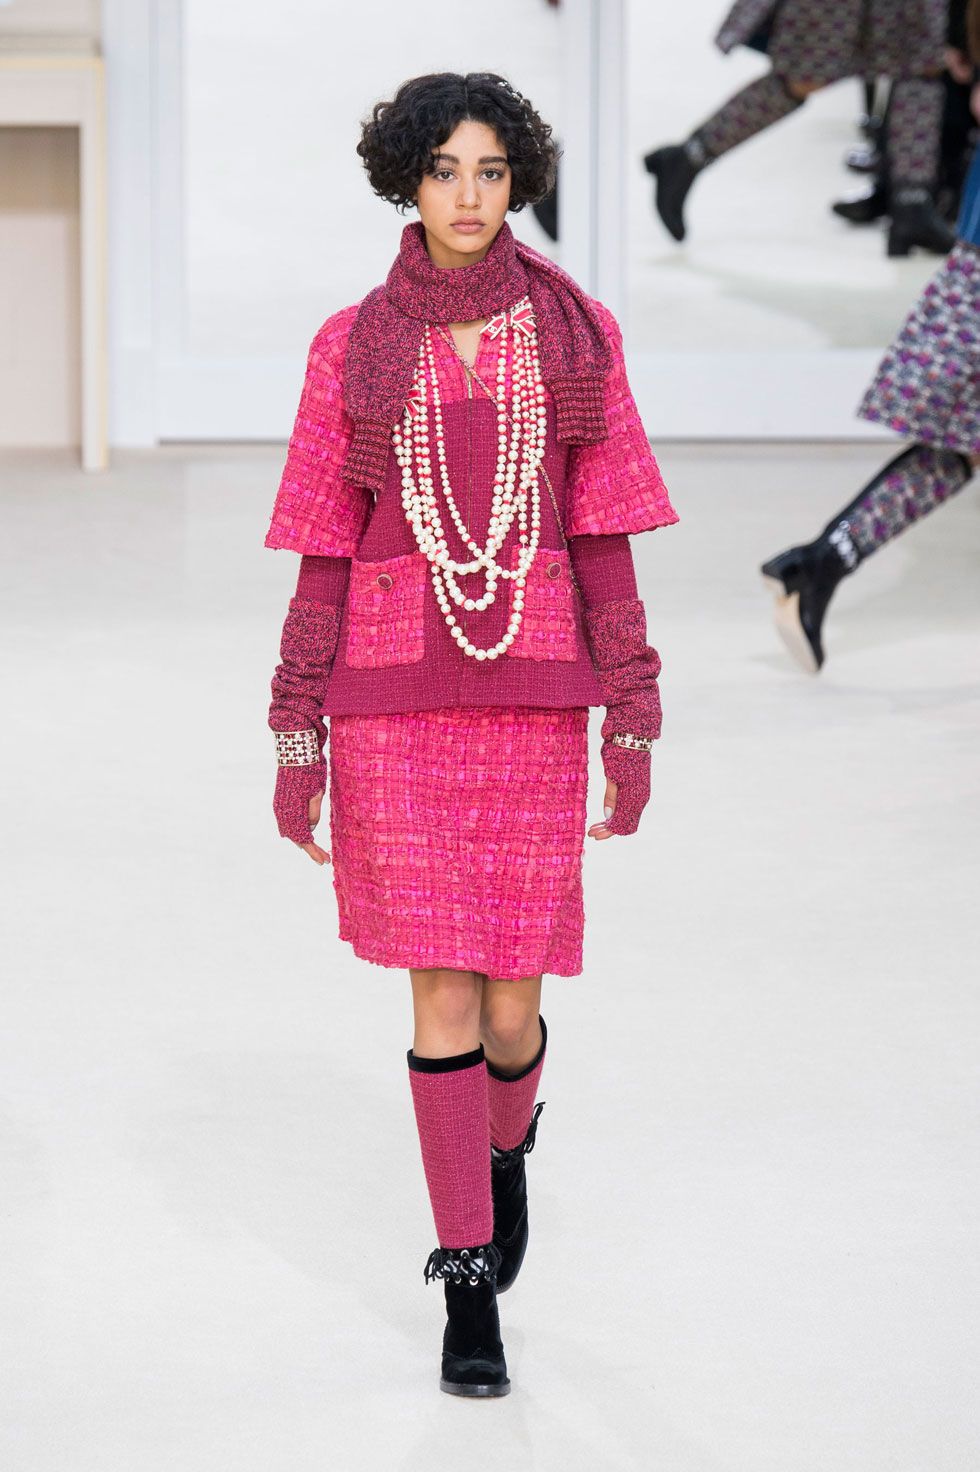 All the Looks From the Chanel Fall 2016 Ready-to-Wear Show